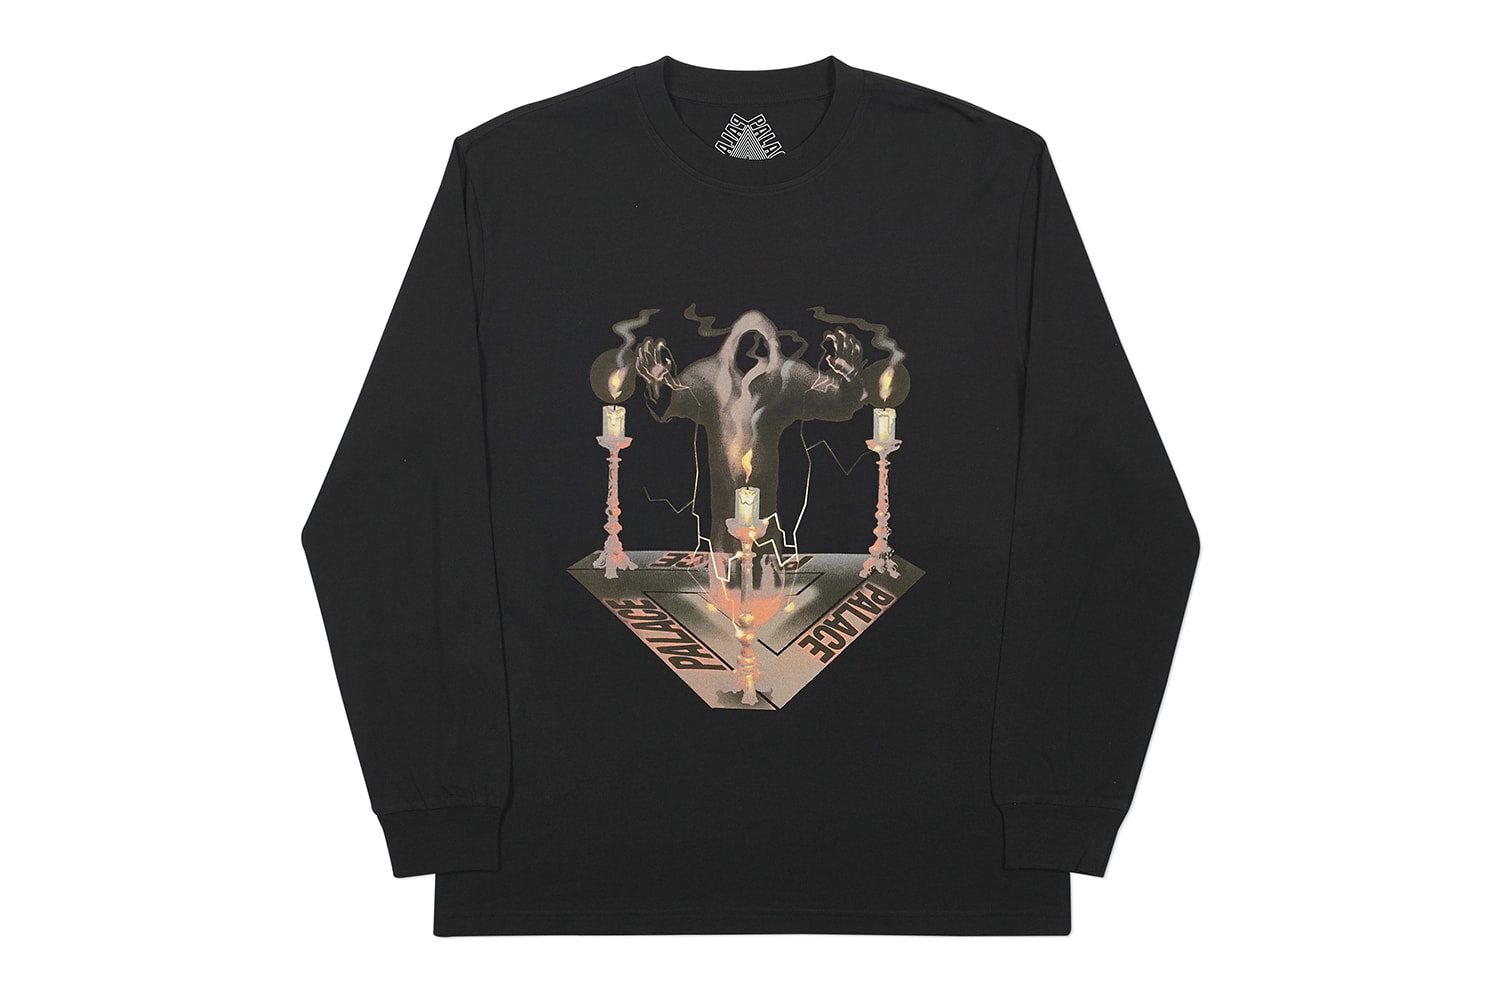 Palace SPOOKED Halloween Release Hoodie Crewneck Sweater T shirt Black Info Date Buy Skateboards Tri ferg